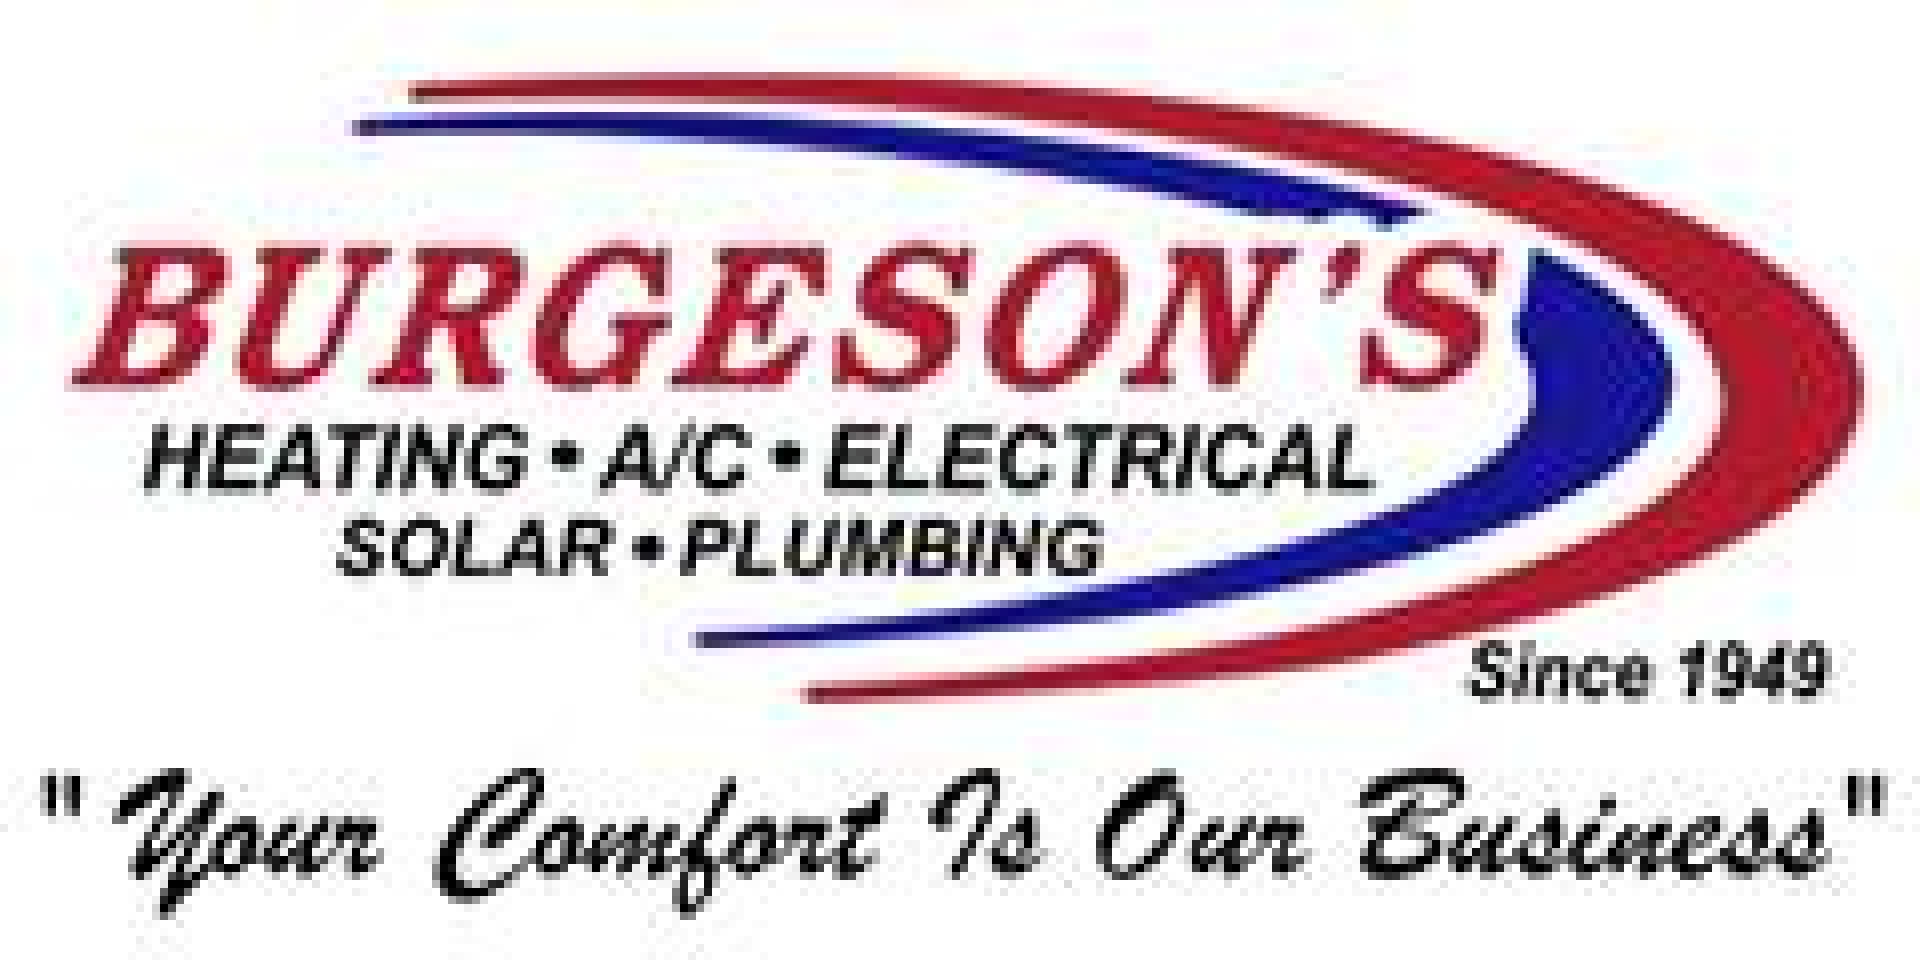 Burgeson's Heating & Air Conditioning, Inc.